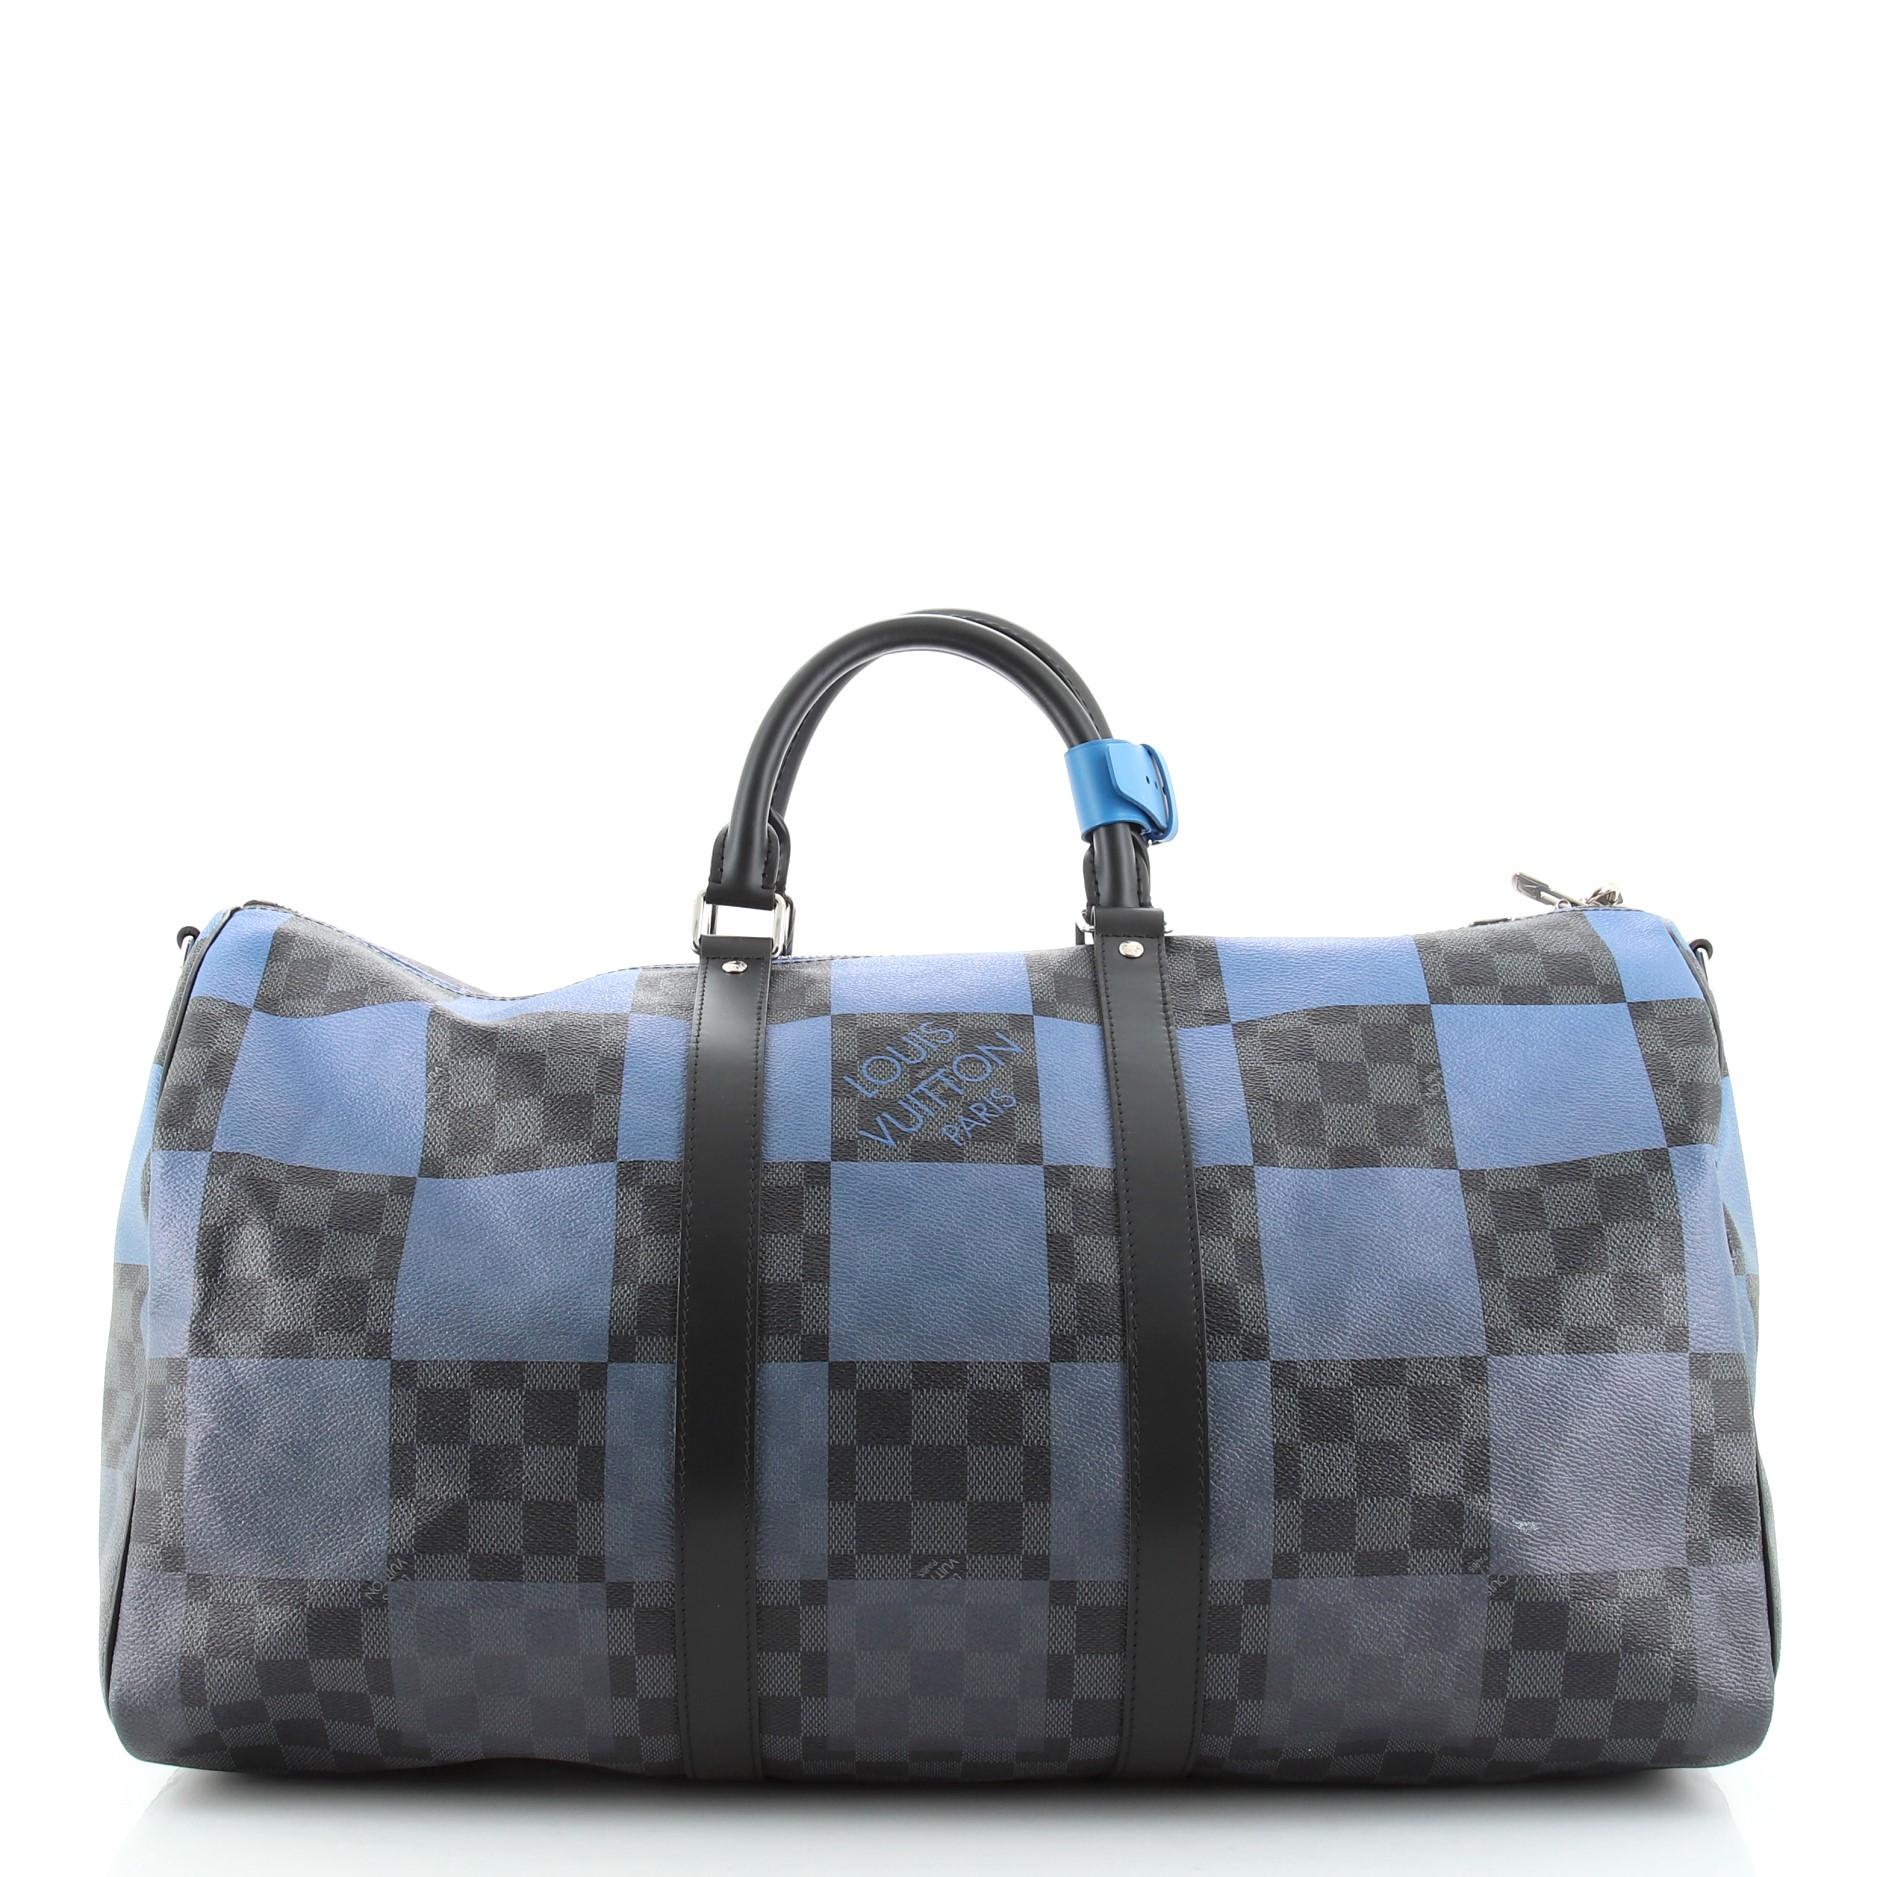 Louis Vuitton Keepall Bandouliere Bag Giant Damier Graphite Canvas 50. Light odor in interior. Marks on base corners, creasing on exterior, scratches on hardware.     76307MSC